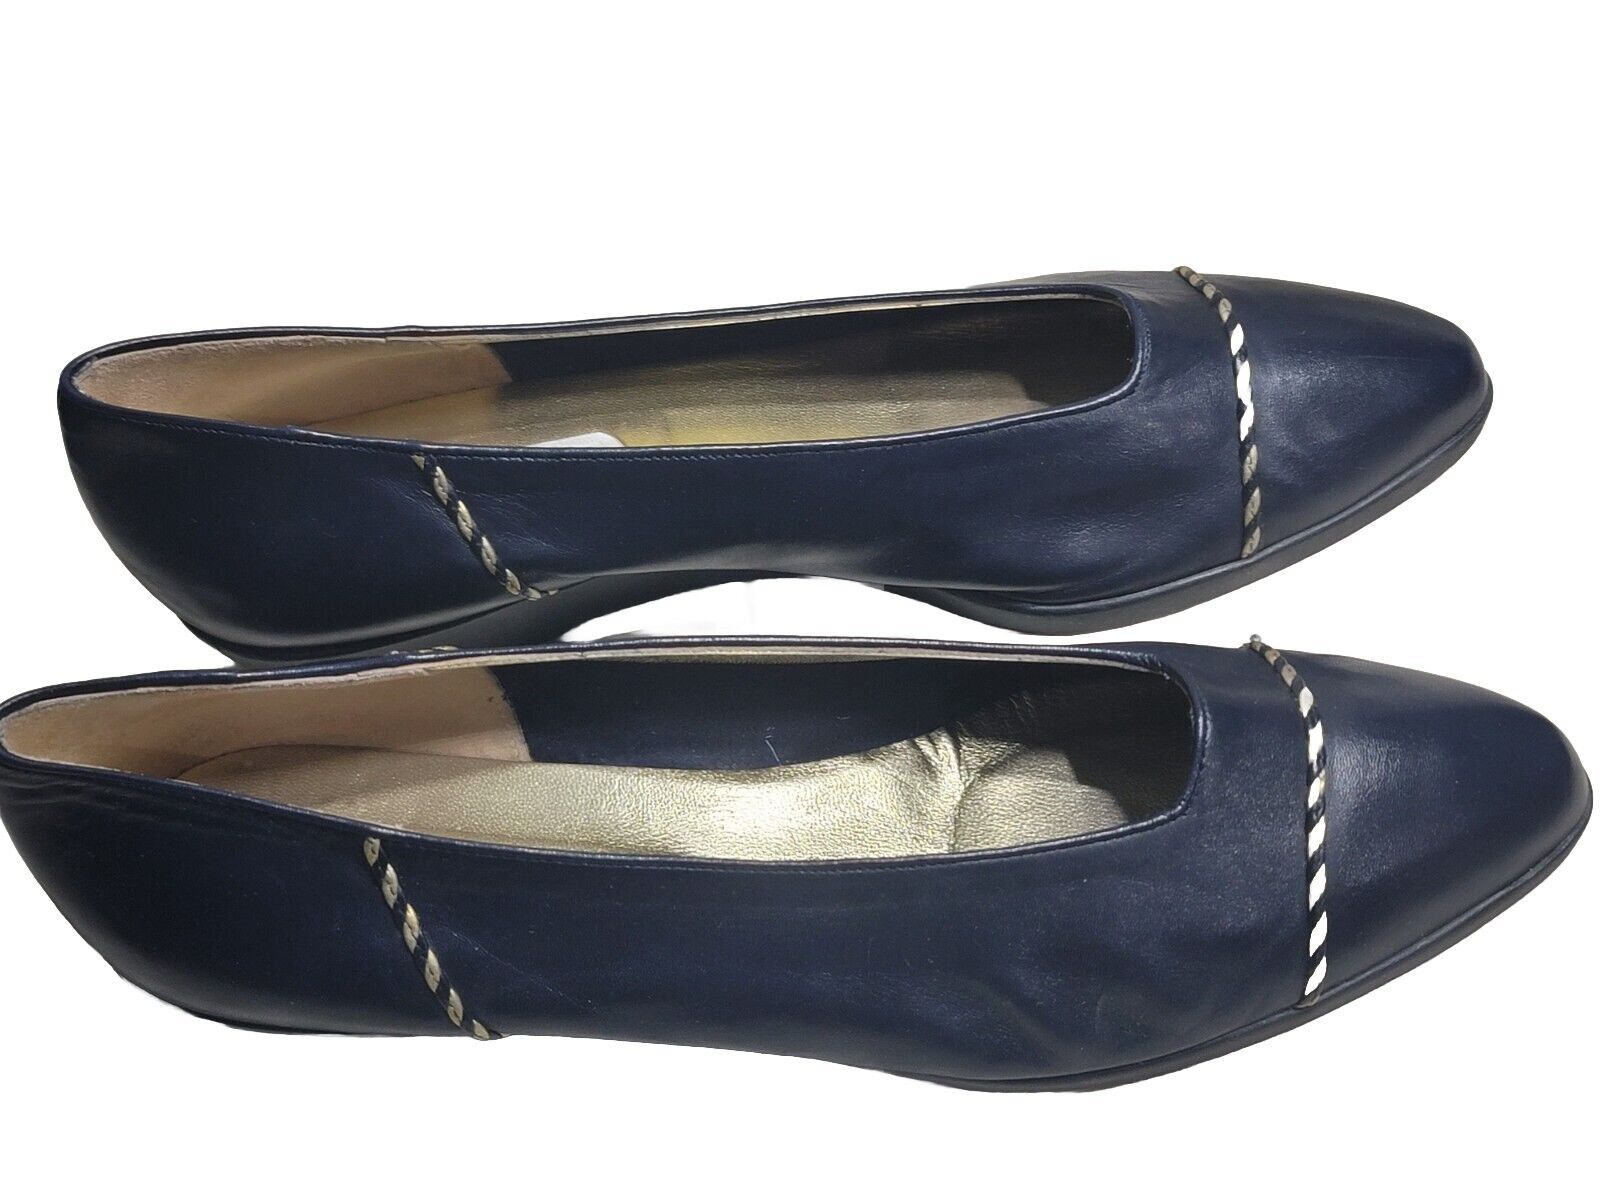 Bally Olympia Navy Calf Leather Flats Wedge Shoes Women\'s Size 11 M 11M Comfort 